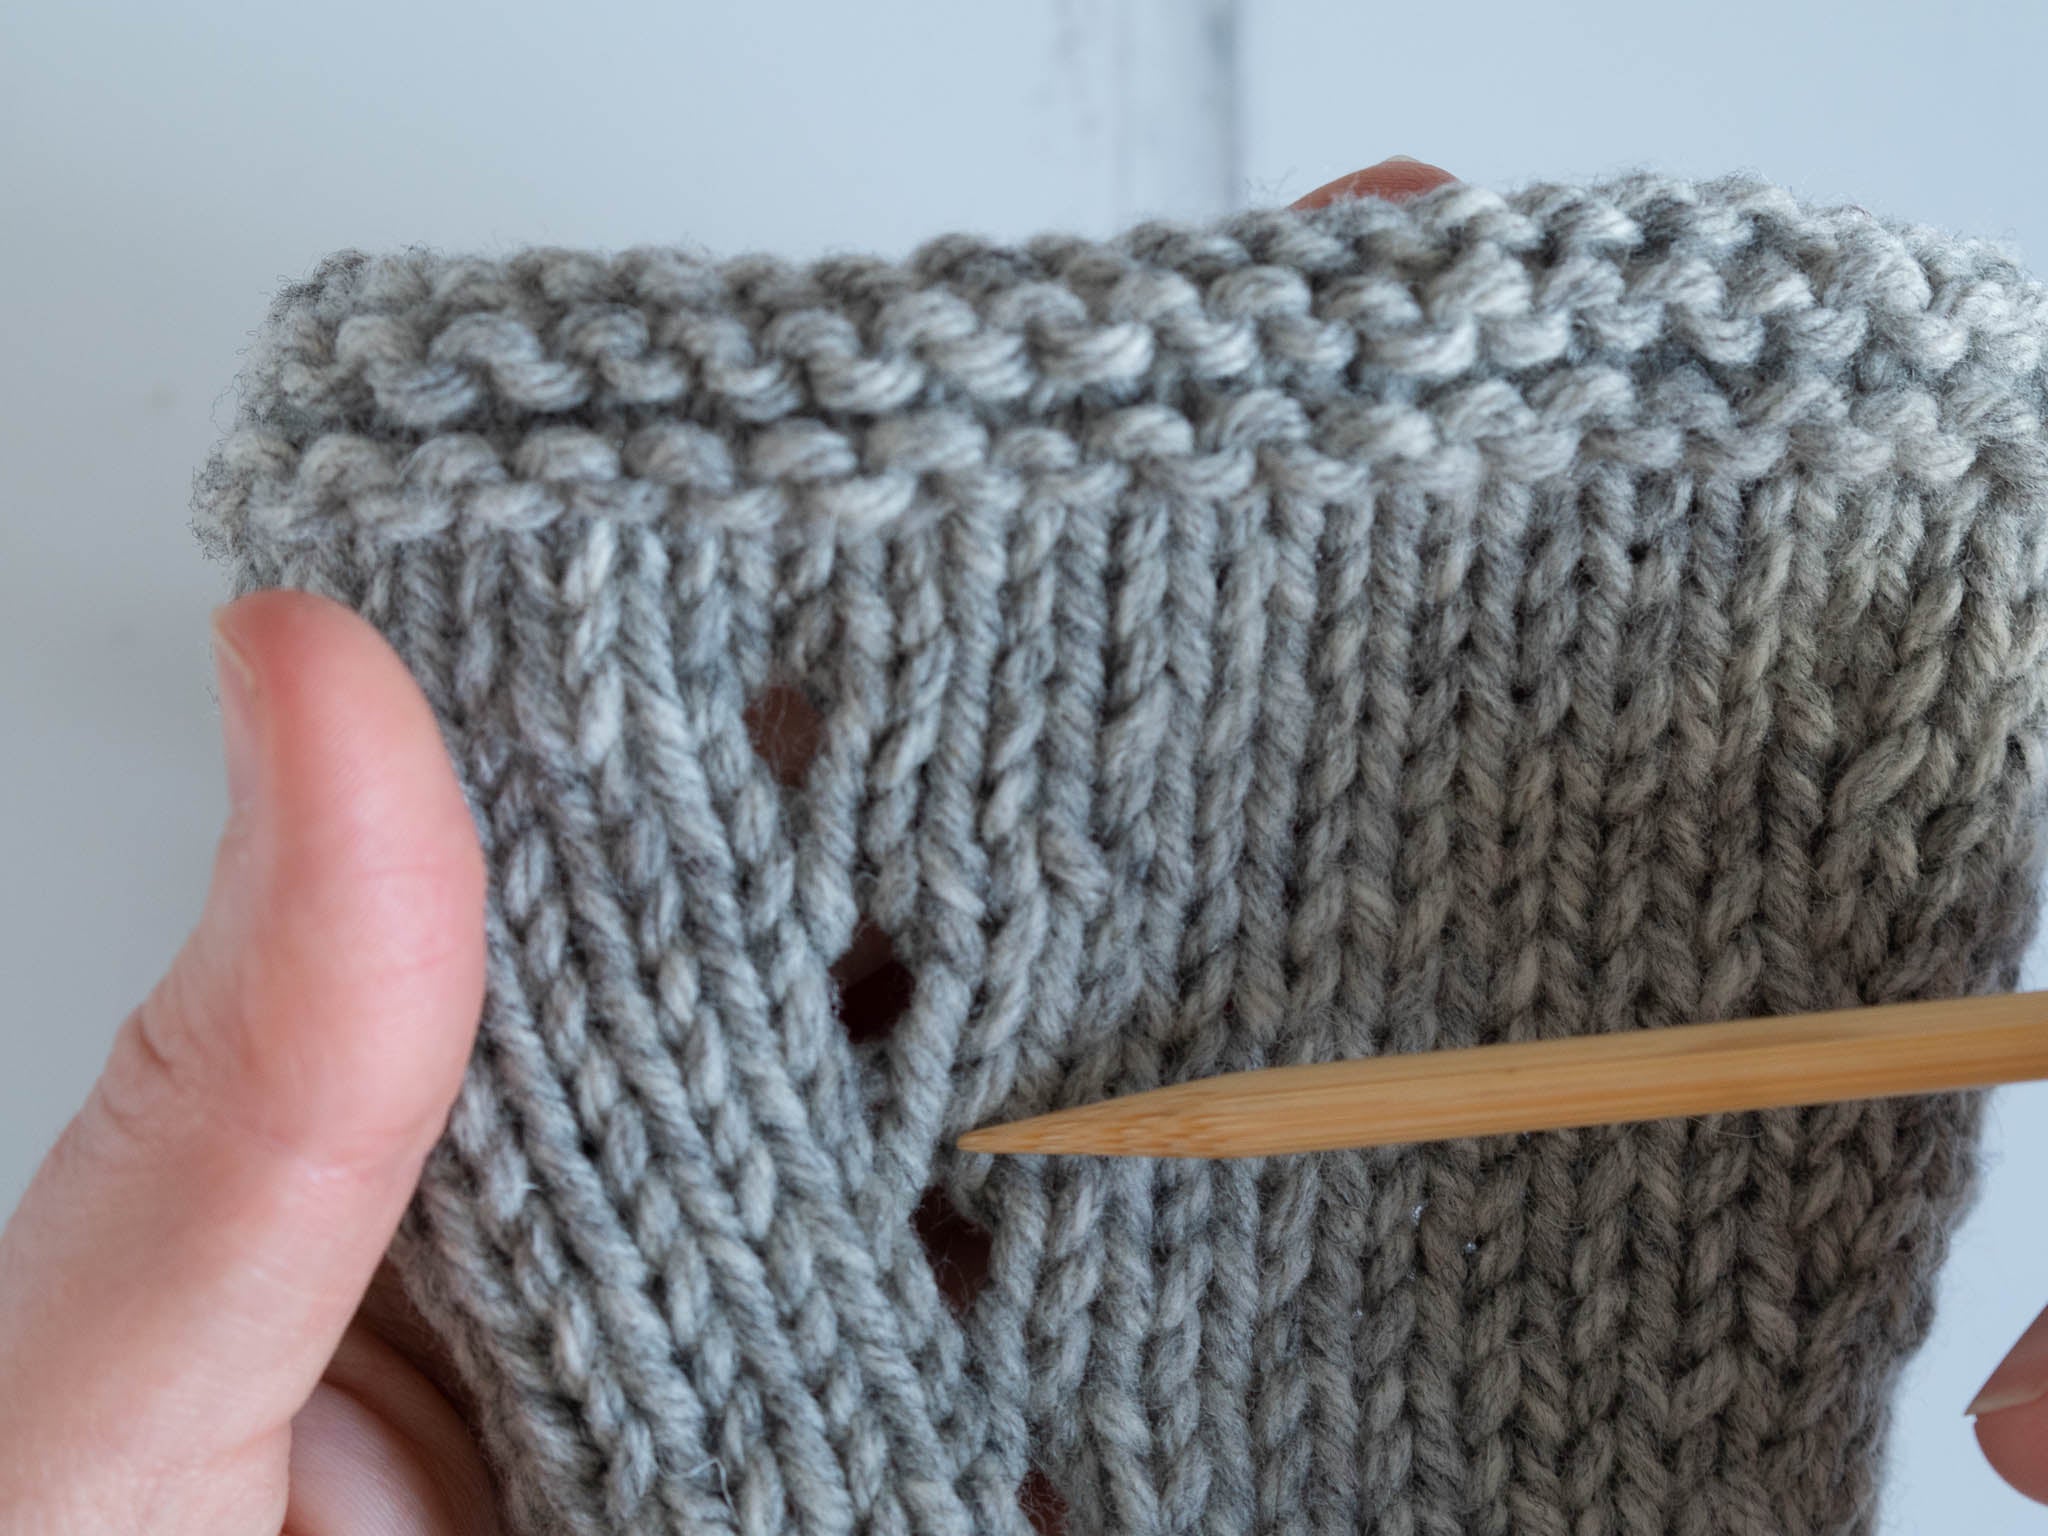 yarn over increases shown on a grey knitted swatch